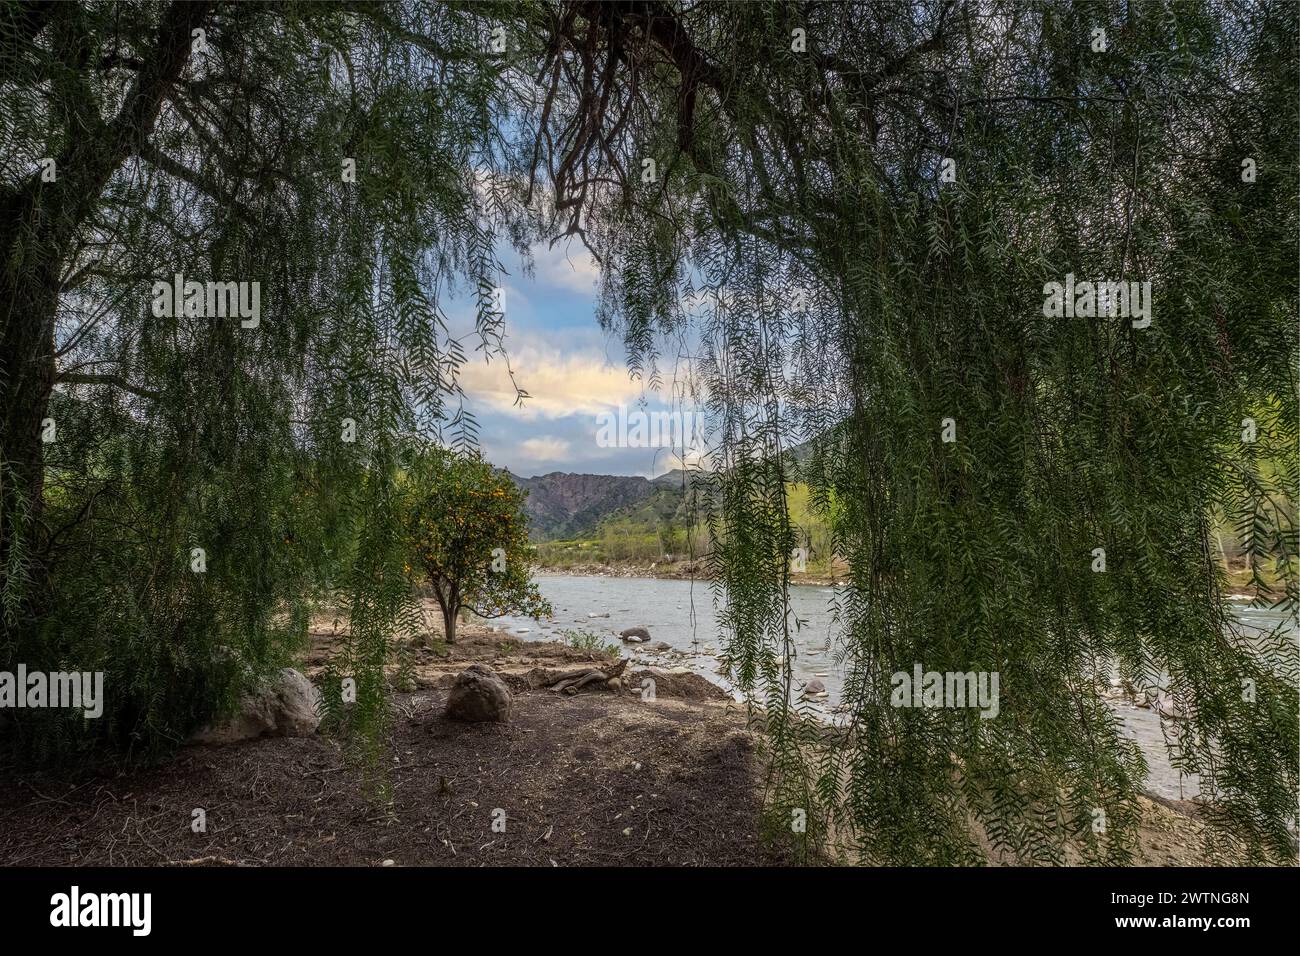 Willow tree along the bank of a flowing river arches to frame the scene of sky and hills. Stock Photo